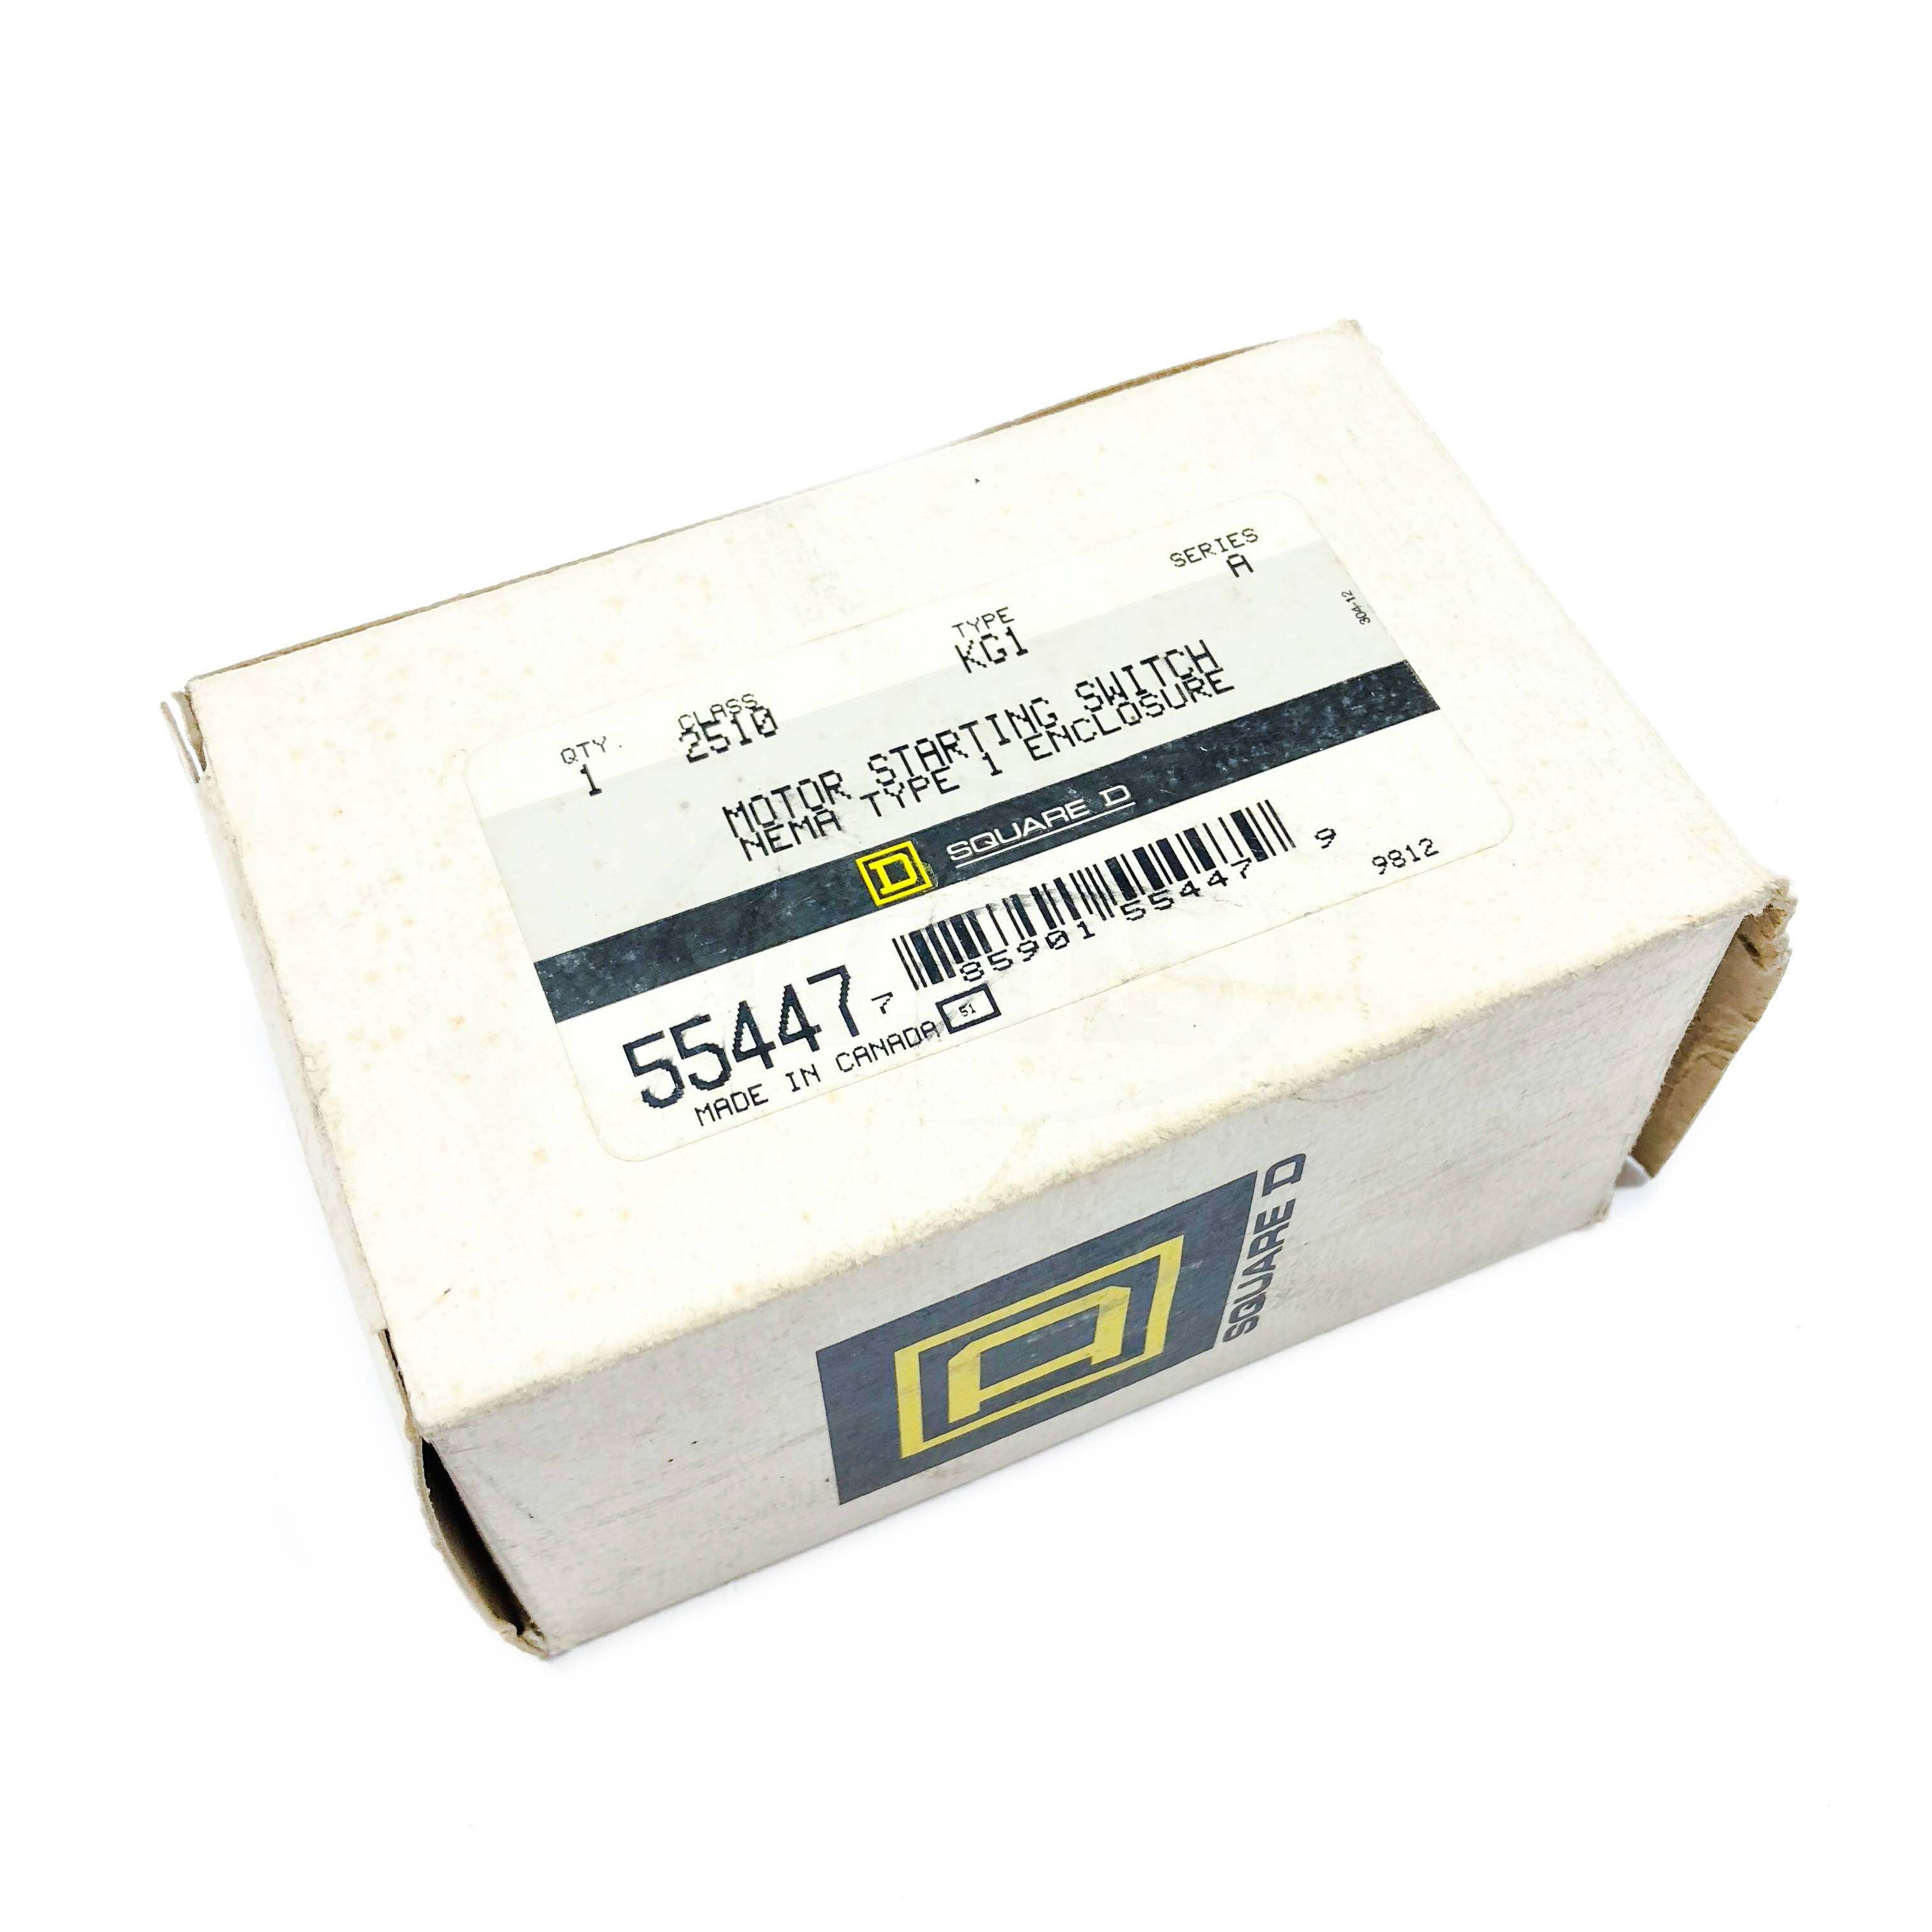 Square D 55447 Motor Starting Switch Class 2510 Type Kg1 for sale online 